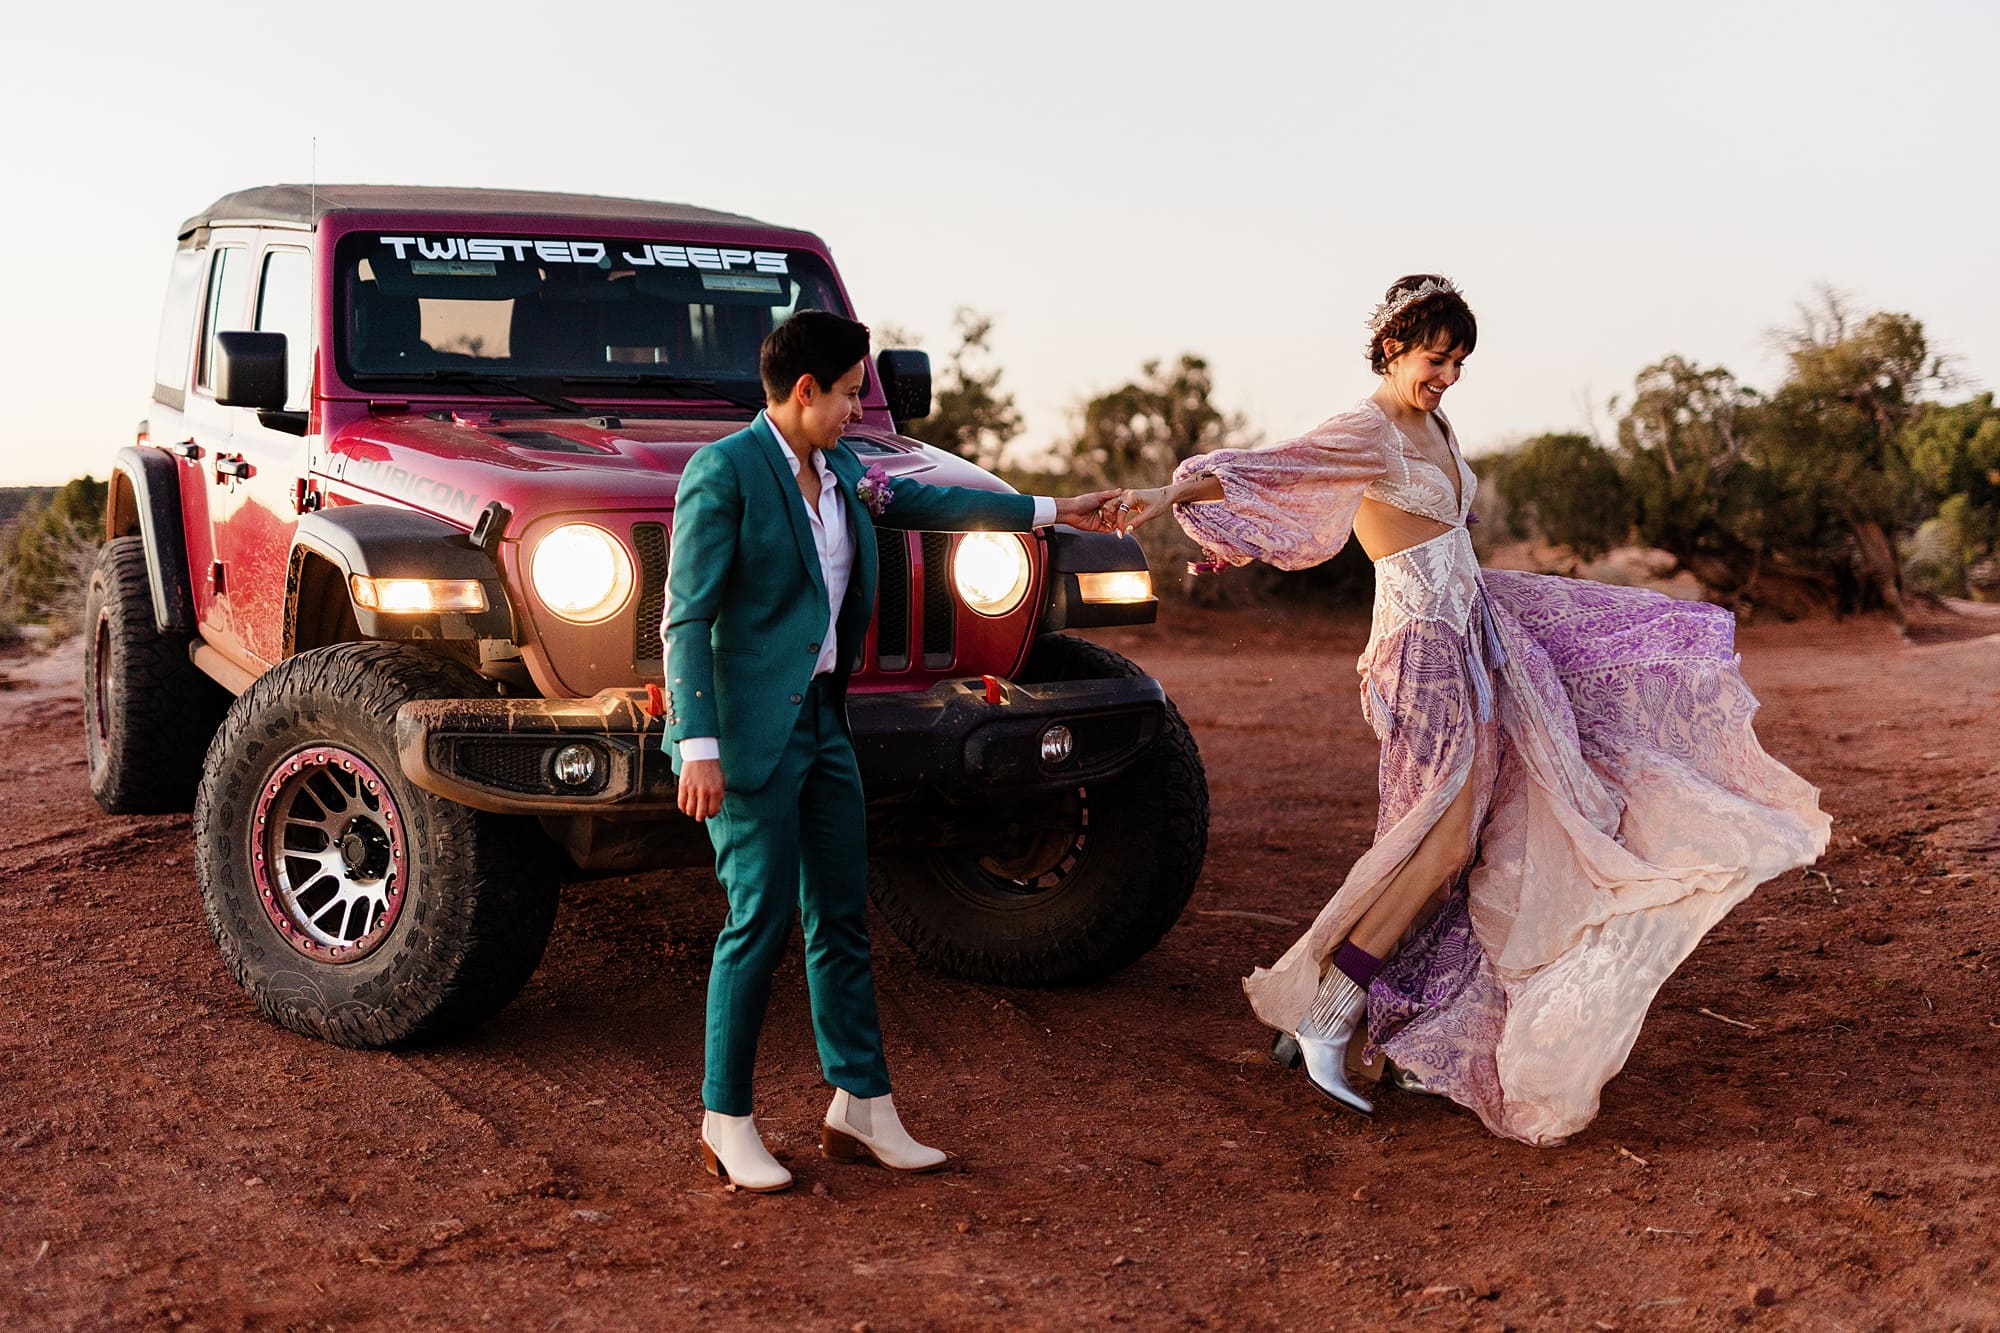 A couple in wedding attire poses in front of an off-roading vehicle in Moab, Utah.